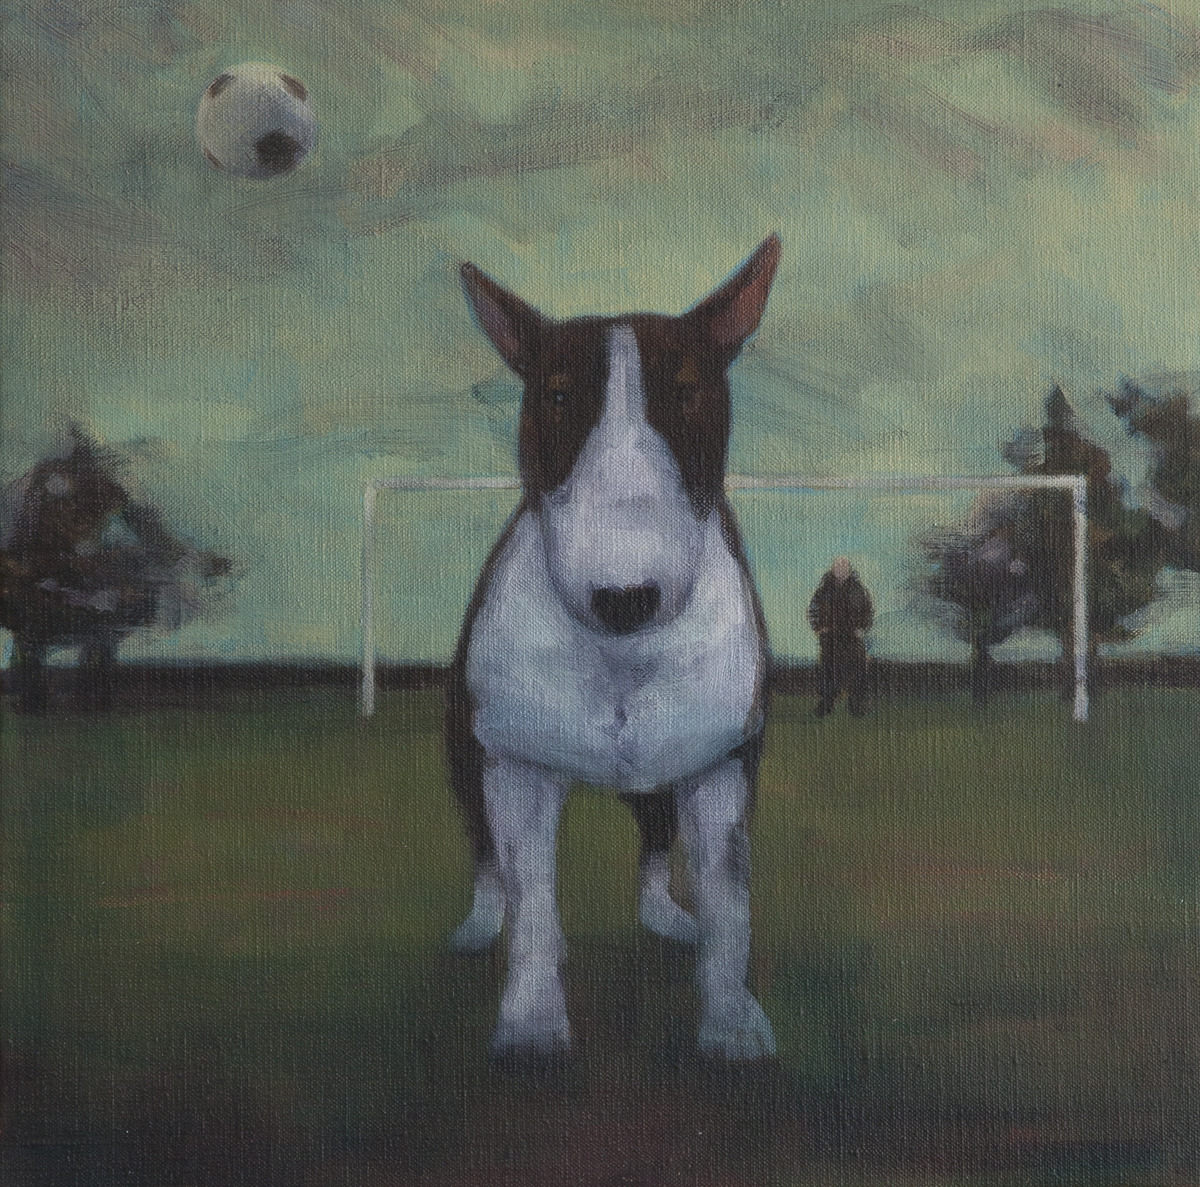 Headers and Volleys (2014), Oil on Linen, 35.5 x 35.5cm